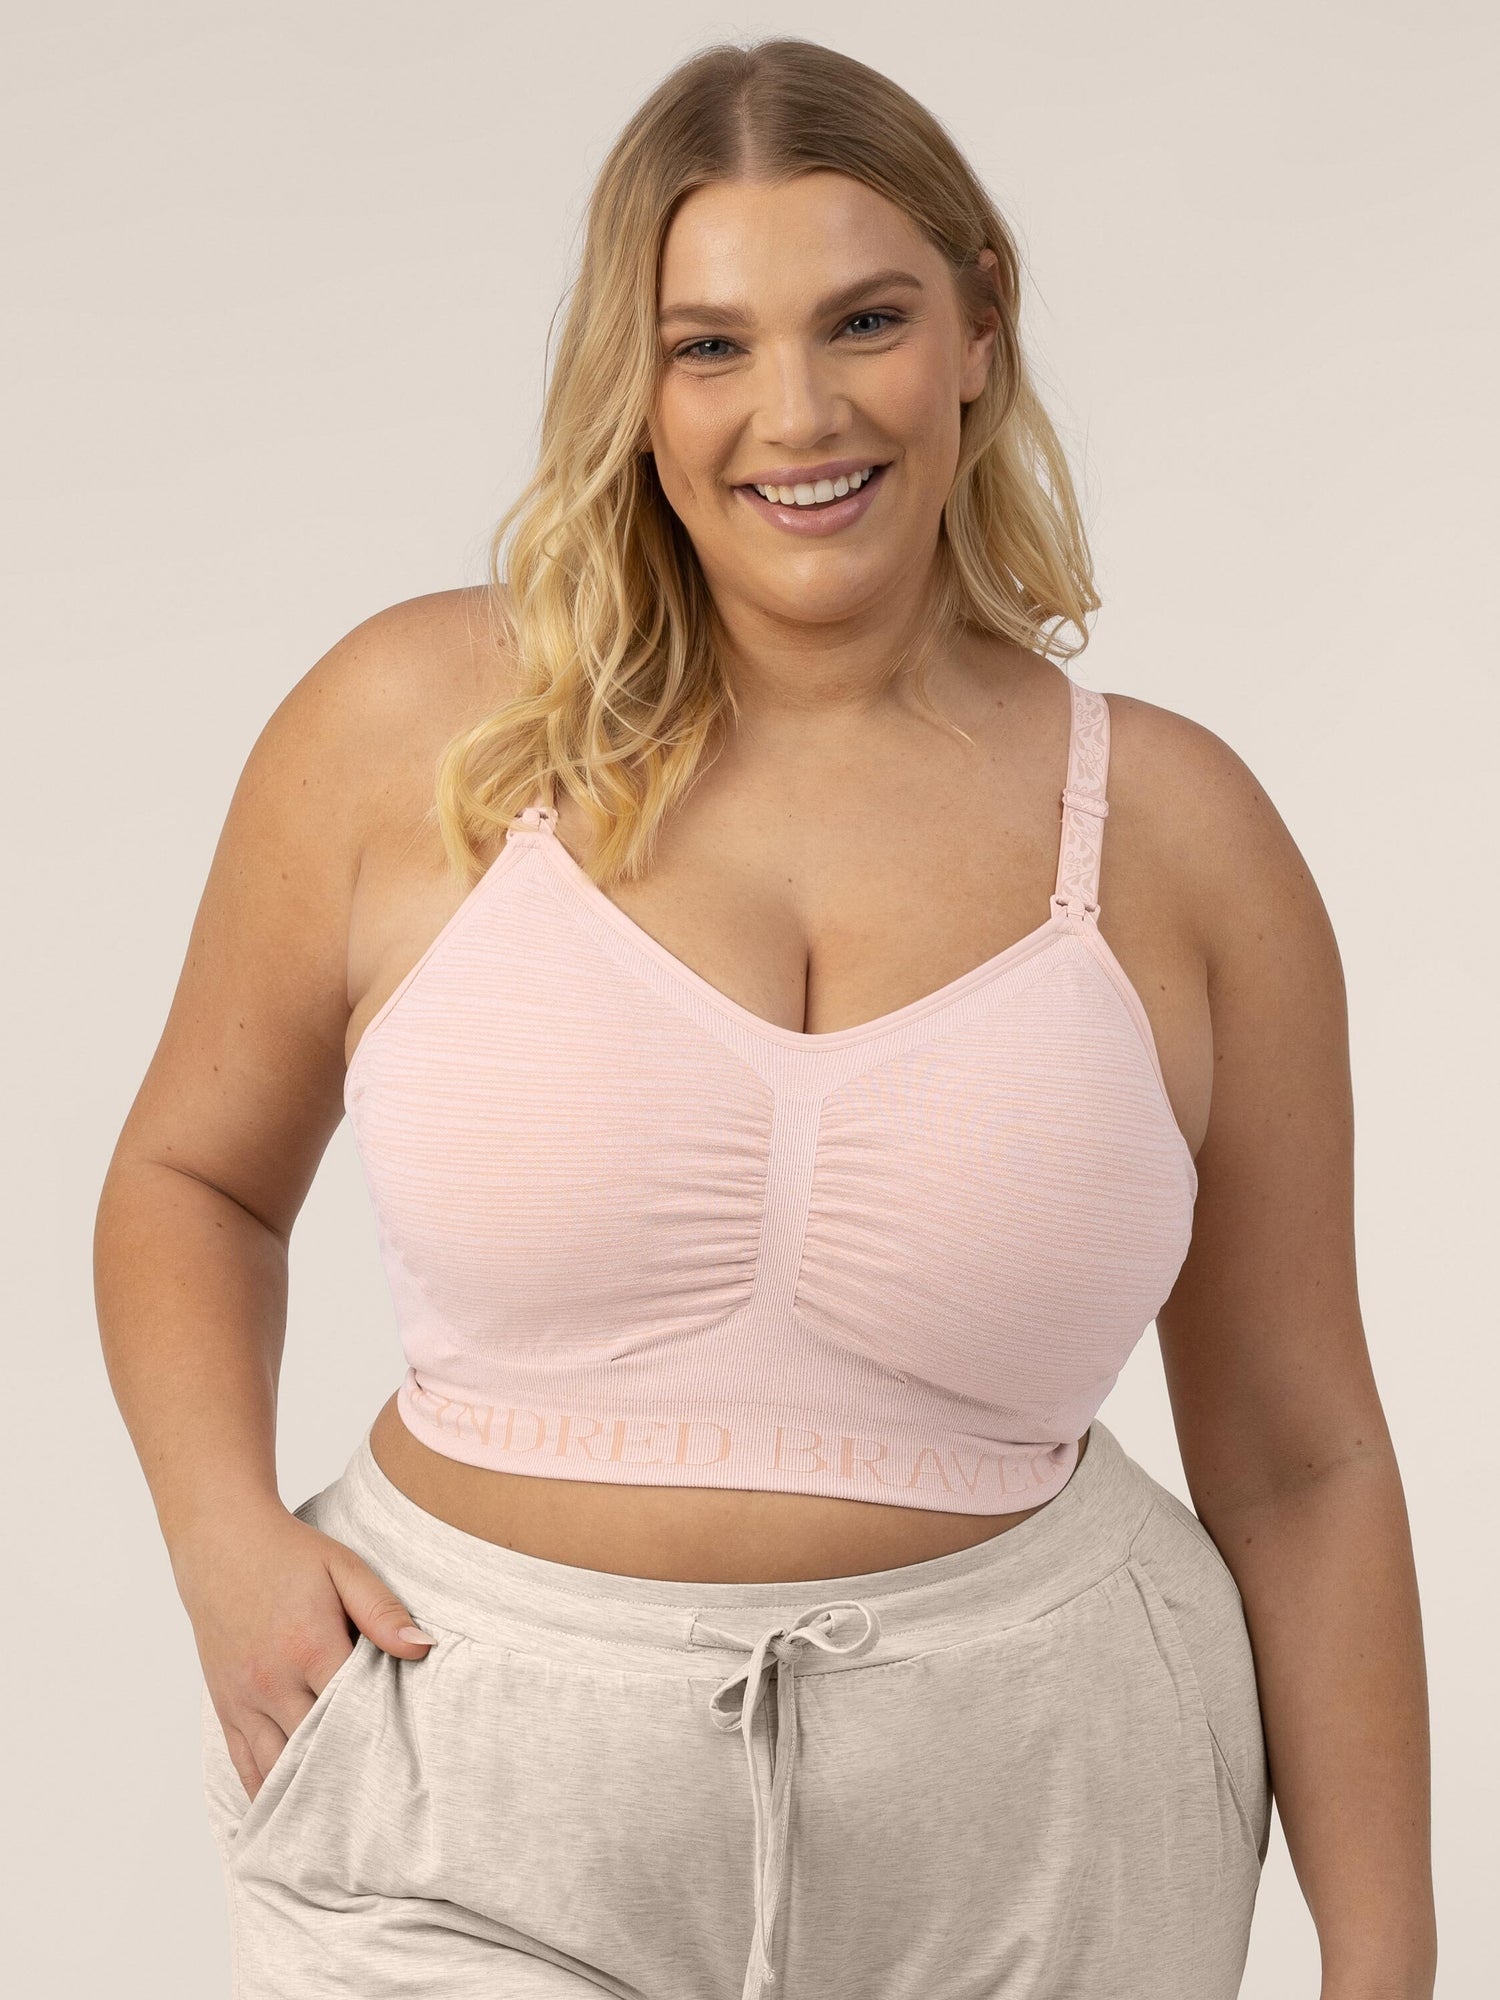 Busty model wearing the Sublime® Hands-Free Pumping & Nursing Bra in Pink Heather